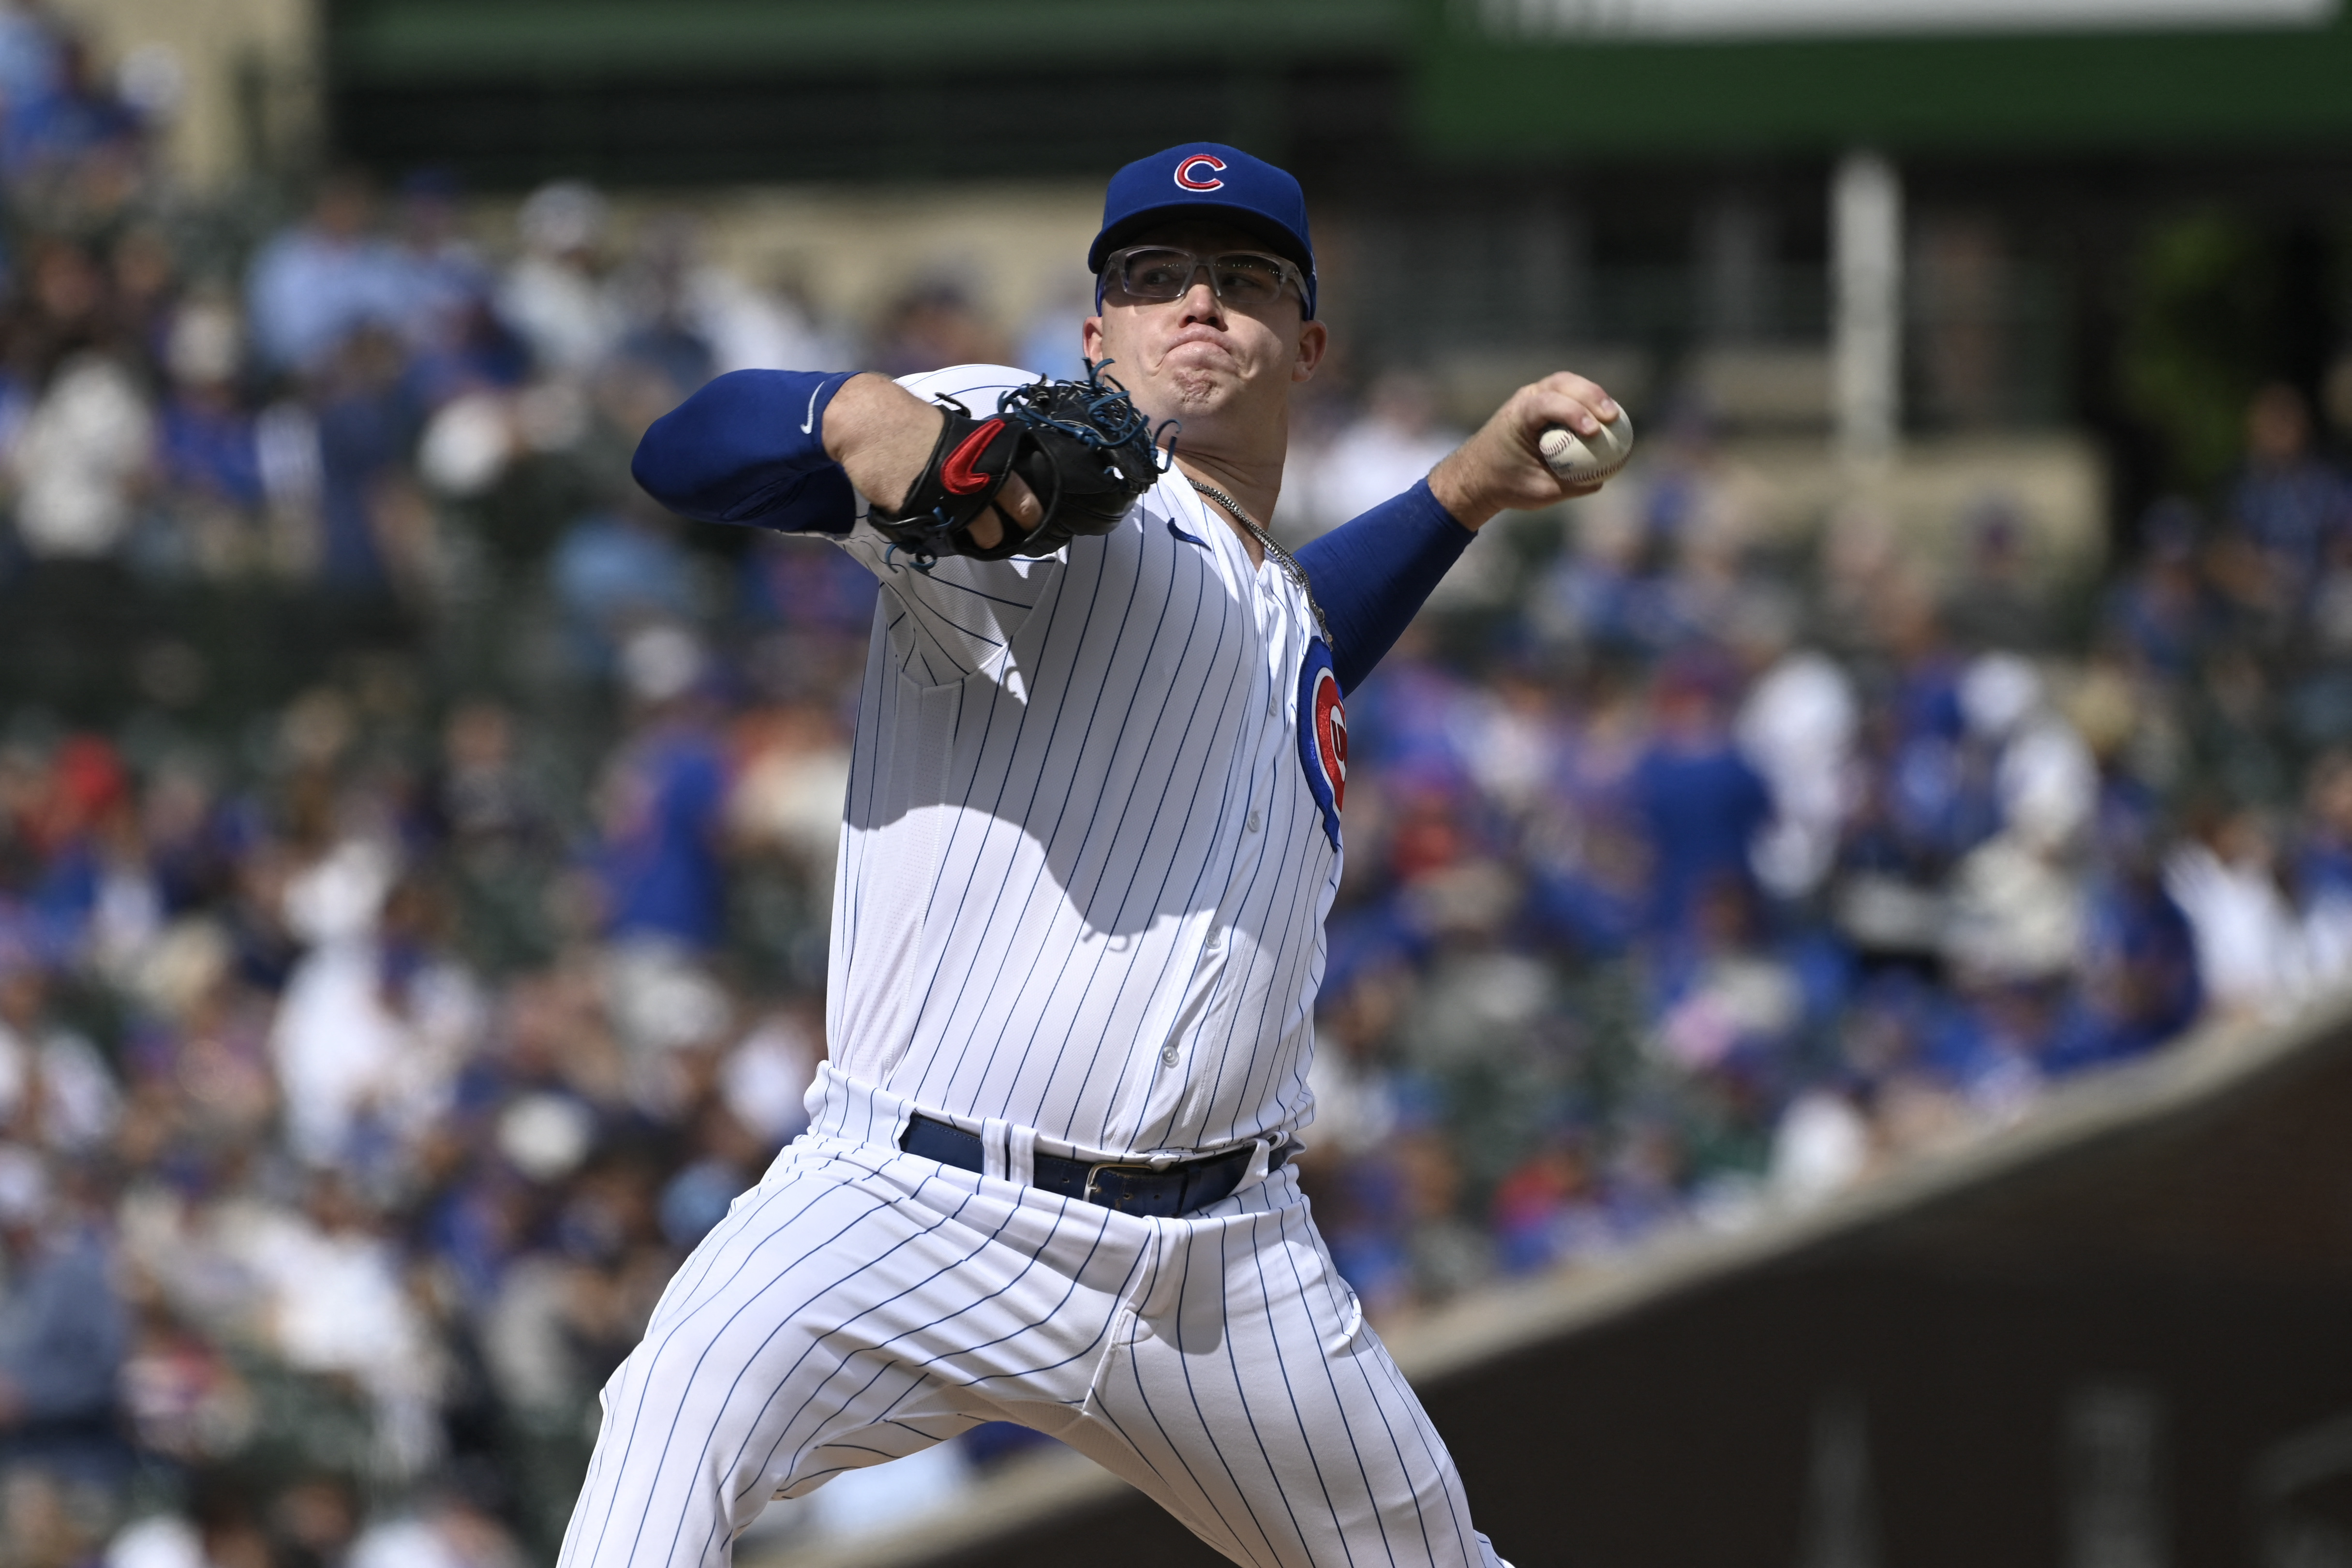 Patrick Wisdom: Chicago Cubs rookie's season ends on IL